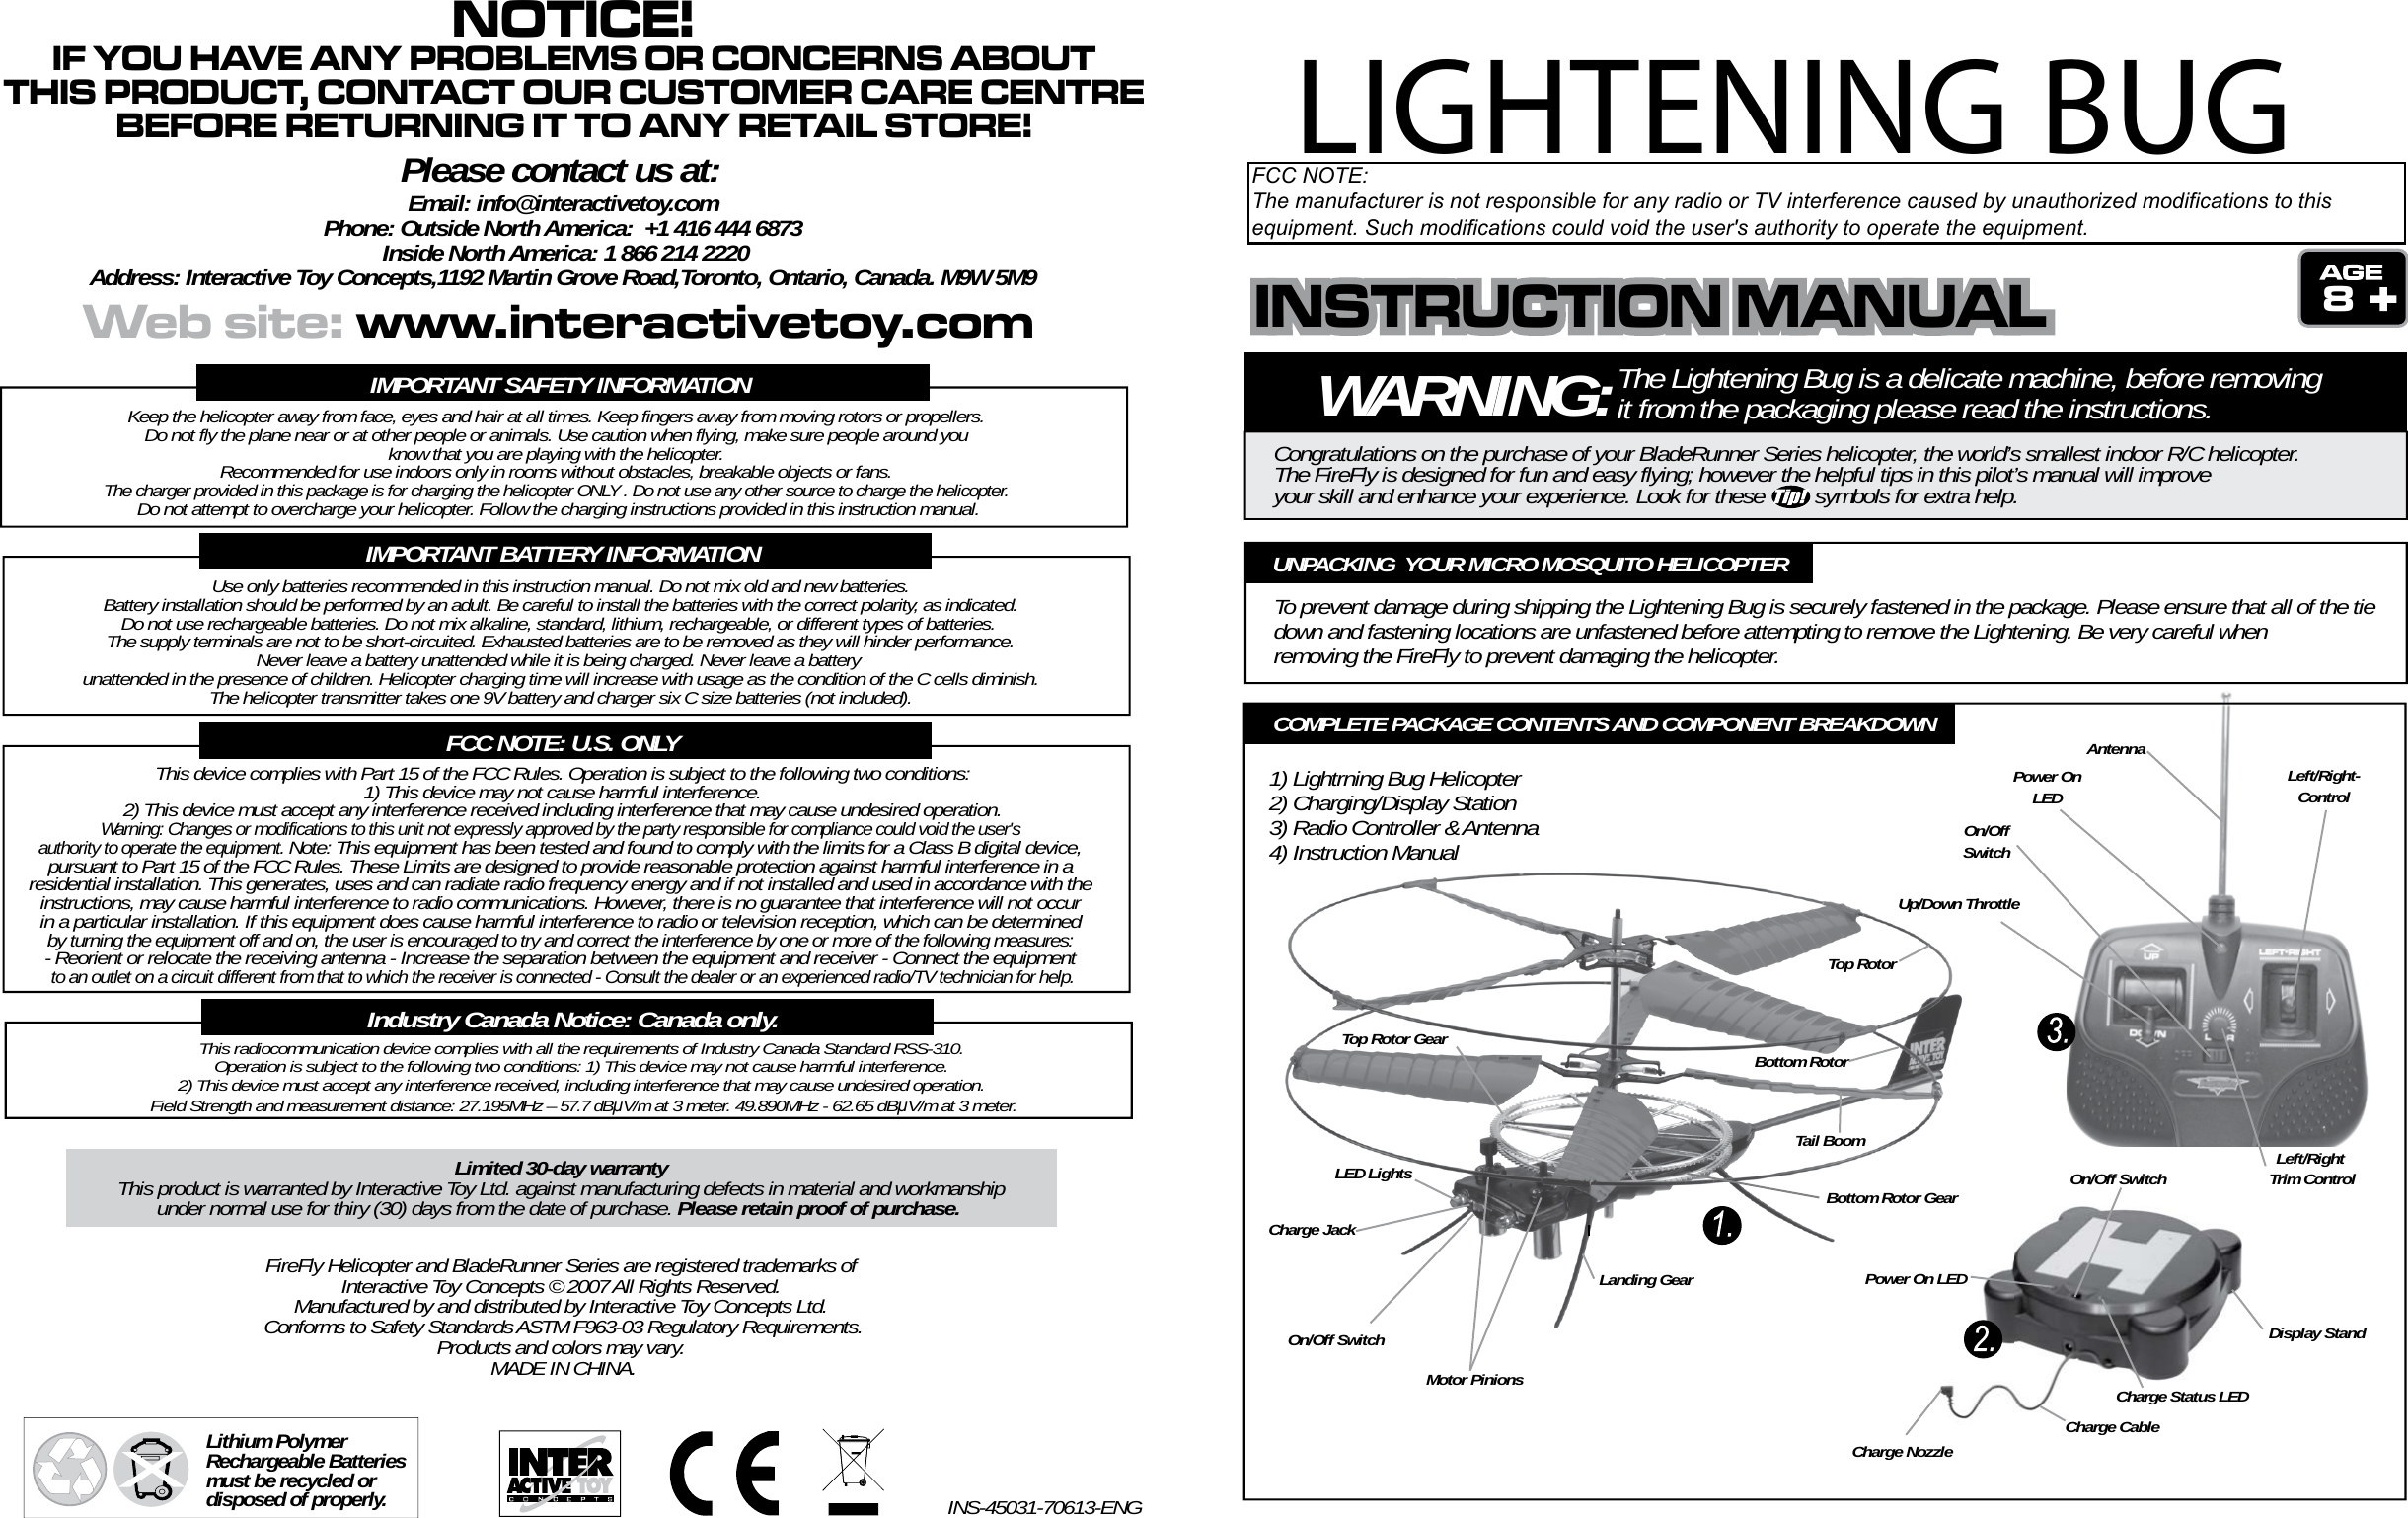 WARNING:The Lightening Bug is a delicate machine, before removing it from the packaging please read the instructions.Congratulations on the purchase of your BladeRunner Series helicopter, the world’s smallest indoor R/C helicopter. The FireFly is designed for fun and easy flying; however the helpful tips in this pilot’s manual will improveyour skill and enhance your experience. Look for these         symbols for extra help.8To prevent damage during shipping the Lightening Bug is securely fastened in the package. Please ensure that all of the tie down and fastening locations are unfastened before attempting to remove the Lightening. Be very careful when removing the FireFly to prevent damaging the helicopter.UNPACKING  YOUR MICRO MOSQUITO HELICOPTERTop RotorBottom RotorTop Rotor GearBottom Rotor GearMotor PinionsLED LightsCharge JackOn/Off SwitchLanding GearTail BoomUp/Down ThrottleLeft/Right-ControlLeft/Right Trim ControlOn/OffSwitchPower OnLEDAntennaDisplay StandOn/Off SwitchPower On LEDCharge Status LEDCharge CableCharge NozzleCOMPLETE PACKAGE CONTENTS AND COMPONENT BREAKDOWN1) Lightrning Bug Helicopter2) Charging/Display Station3) Radio Controller &amp; Antenna4) Instruction ManualIMPORTANT SAFETY INFORMATIONKeep the helicopter away from face, eyes and hair at all times. Keep fingers away from moving rotors or propellers. Do not fly the plane near or at other people or animals. Use caution when flying, make sure people around you know that you are playing with the helicopter. Recommended for use indoors only in rooms without obstacles, breakable objects or fans. The charger provided in this package is for charging the helicopter ONLY . Do not use any other source to charge the helicopter. Do not attempt to overcharge your helicopter. Follow the charging instructions provided in this instruction manual.IMPORTANT BATTERY INFORMATIONUse only batteries recommended in this instruction manual. Do not mix old and new batteries.Battery installation should be performed by an adult. Be careful to install the batteries with the correct polarity, as indicated.Do not use rechargeable batteries. Do not mix alkaline, standard, lithium, rechargeable, or different types of batteries.  The supply terminals are not to be short-circuited. Exhausted batteries are to be removed as they will hinder performance. Never leave a battery unattended while it is being charged. Never leave a battery unattended in the presence of children. Helicopter charging time will increase with usage as the condition of the C cells diminish.The helicopter transmitter takes one 9V battery and charger six C size batteries (not included).FCC NOTE: U.S. ONLYThis device complies with Part 15 of the FCC Rules. Operation is subject to the following two conditions:1) This device may not cause harmful interference.2) This device must accept any interference received including interference that may cause undesired operation.Warning: Changes or modifications to this unit not expressly approved by the party responsible for compliance could void the user&apos;s authority to operate the equipment. Note: This equipment has been tested and found to comply with the limits for a Class B digital device, pursuant to Part 15 of the FCC Rules. These Limits are designed to provide reasonable protection against harmful interference in a residential installation. This generates, uses and can radiate radio frequency energy and if not installed and used in accordance with the instructions, may cause harmful interference to radio communications. However, there is no guarantee that interference will not occur in a particular installation. If this equipment does cause harmful interference to radio or television reception, which can be determined by turning the equipment off and on, the user is encouraged to try and correct the interference by one or more of the following measures: - Reorient or relocate the receiving antenna - Increase the separation between the equipment and receiver - Connect the equipment to an outlet on a circuit different from that to which the receiver is connected - Consult the dealer or an experienced radio/TV technician for help.Lithium Polymer Rechargeable Batteries must be recycled or disposed of properly.FireFly Helicopter and BladeRunner Series are registered trademarks of Interactive Toy Concepts © 2007 All Rights Reserved. Manufactured by and distributed by Interactive Toy Concepts Ltd. Conforms to Safety Standards ASTM F963-03 Regulatory Requirements.Products and colors may vary. MADE IN CHINA.INS-45031-70613-ENGLimited 30-day warrantyThis product is warranted by Interactive Toy Ltd. against manufacturing defects in material and workmanshipunder normal use for thiry (30) days from the date of purchase. Please retain proof of purchase. This radiocommunication device complies with all the requirements of Industry Canada Standard RSS-310. Operation is subject to the following two conditions: 1) This device may not cause harmful interference. 2) This device must accept any interference received, including interference that may cause undesired operation. Field Strength and measurement distance: 27.195MHz – 57.7 dBμV/m at 3 meter. 49.890MHz - 62.65 dBμV/m at 3 meter.Industry Canada Notice: Canada only.INSTRUCTION MANUALINSTRUCTION MANUALINSTRUCTION MANUALWeb site: www.interactivetoy.comNOTICE!IF YOU HAVE ANY PROBLEMS OR CONCERNS ABOUTTHIS PRODUCT, CONTACT OUR CUSTOMER CARE CENTREBEFORE RETURNING IT TO ANY RETAIL STORE!Please contact us at:Email: info@interactivetoy.comPhone: Outside North America:  +1 416 444 6873 Inside North America: 1 866 214 2220Address: Interactive Toy Concepts,1192 Martin Grove Road,Toronto, Ontario, Canada. M9W 5M9LIGHTENING BUGFCC NOTE:The manufacturer is not responsible for any radio or TV interference caused by unauthorized modifications to thisequipment. Such modifications could void the user&apos;s authority to operate the equipment.